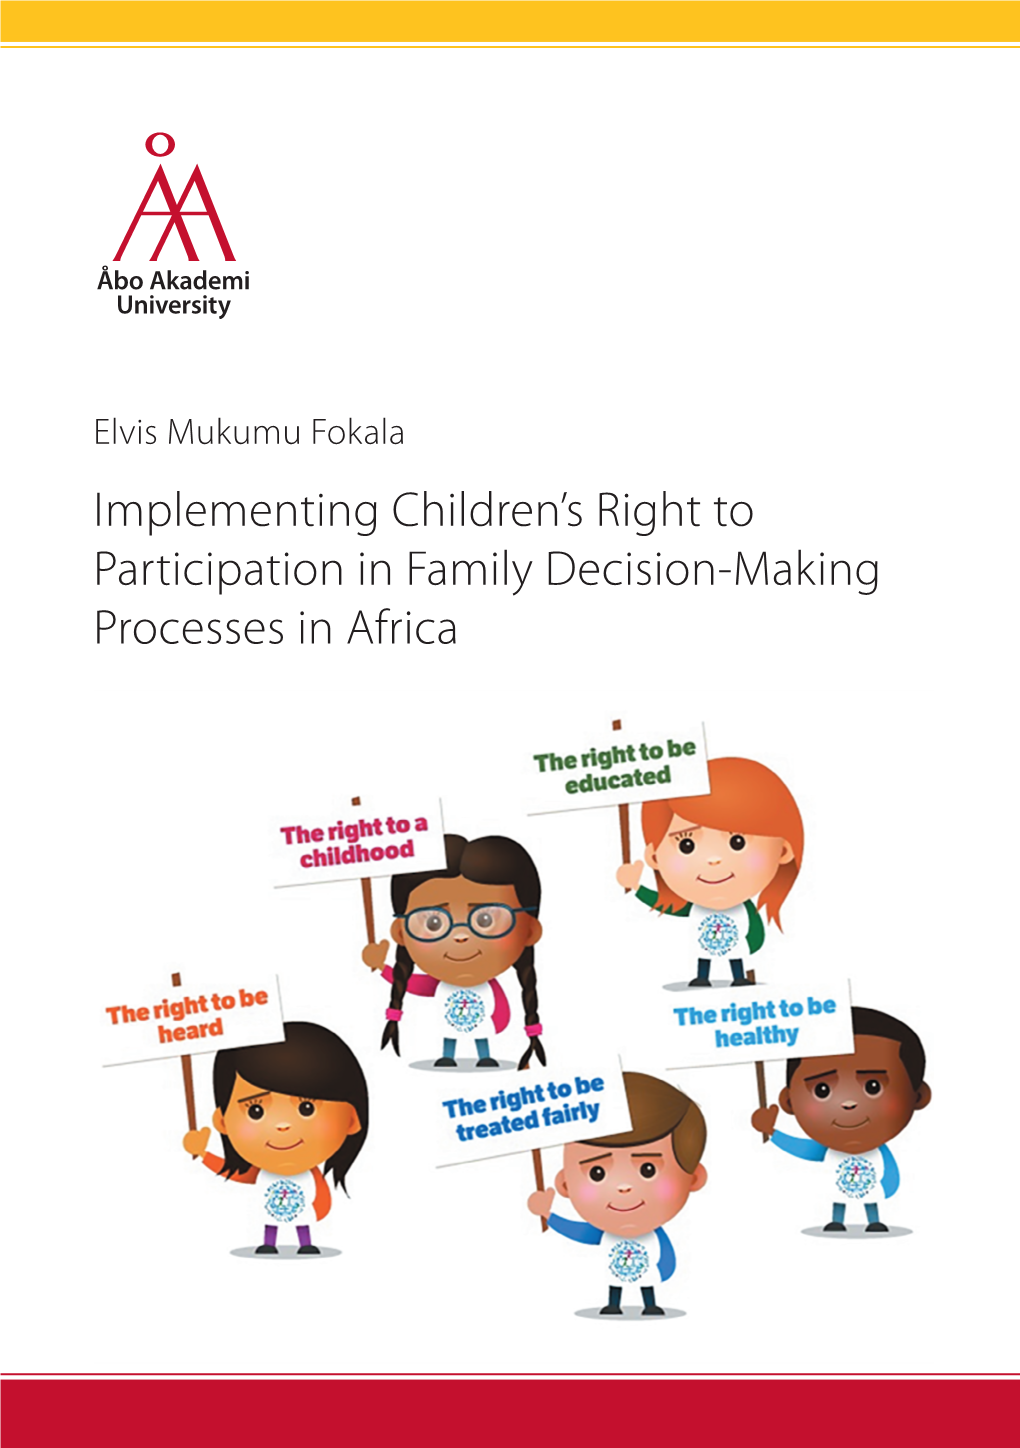 Elvis Mukumu Fokala: Implementing Children's Right to Participation in Family Decision-Making Processes in Africa